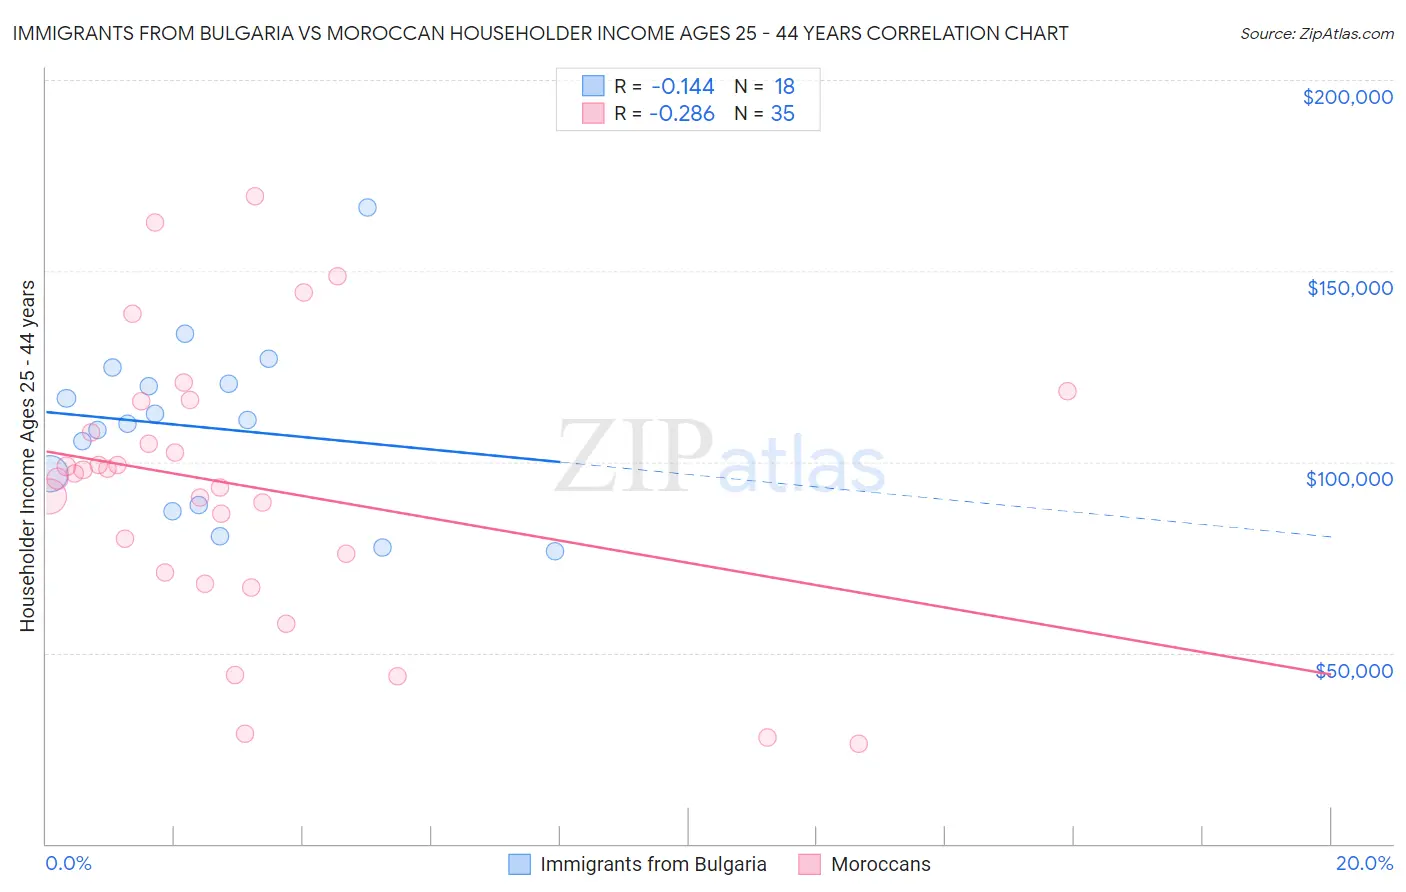 Immigrants from Bulgaria vs Moroccan Householder Income Ages 25 - 44 years